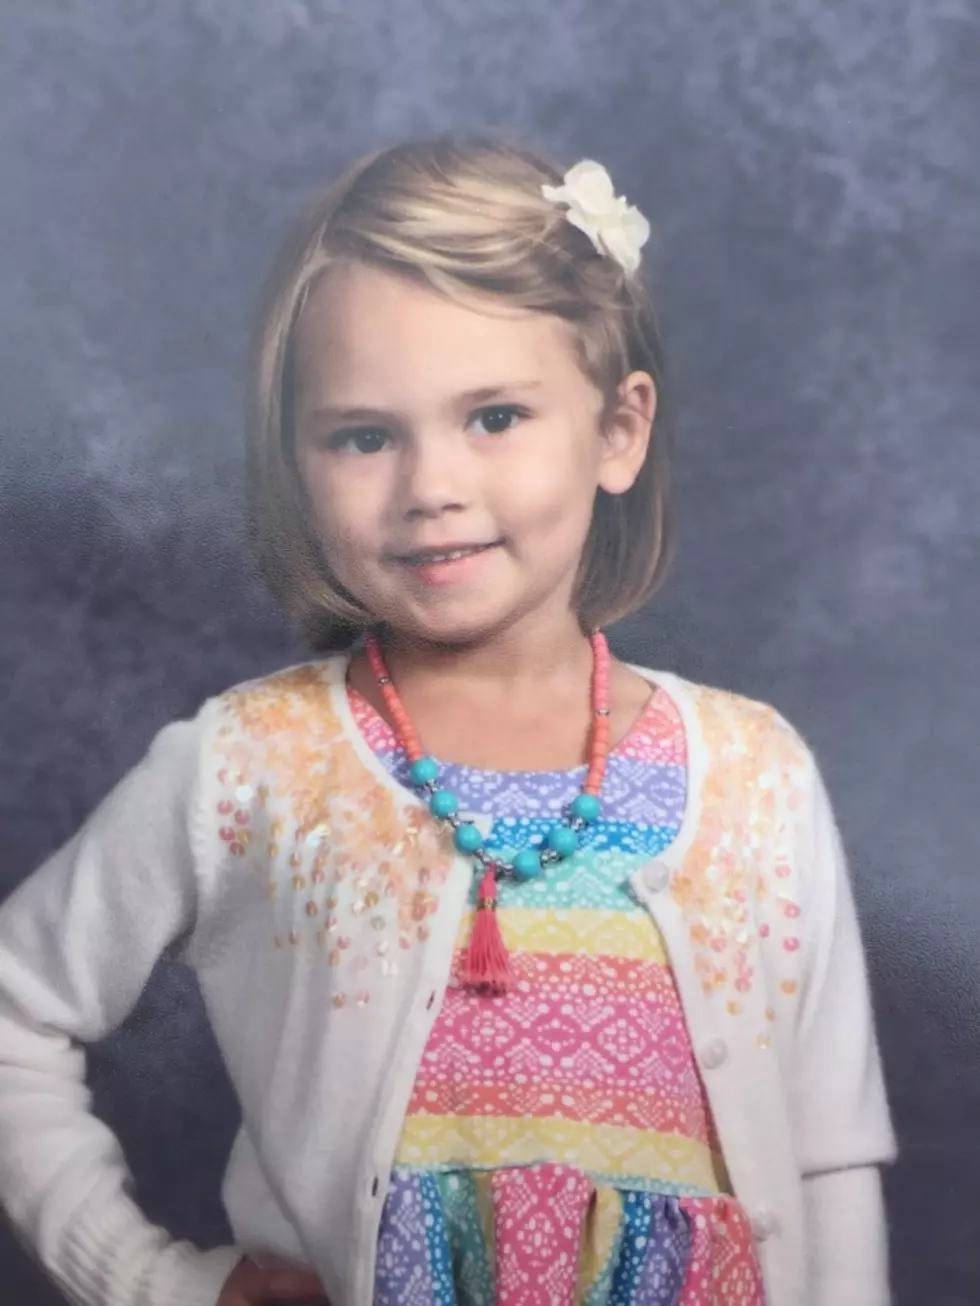 Body of Missing 5-Year-Old Girl Found